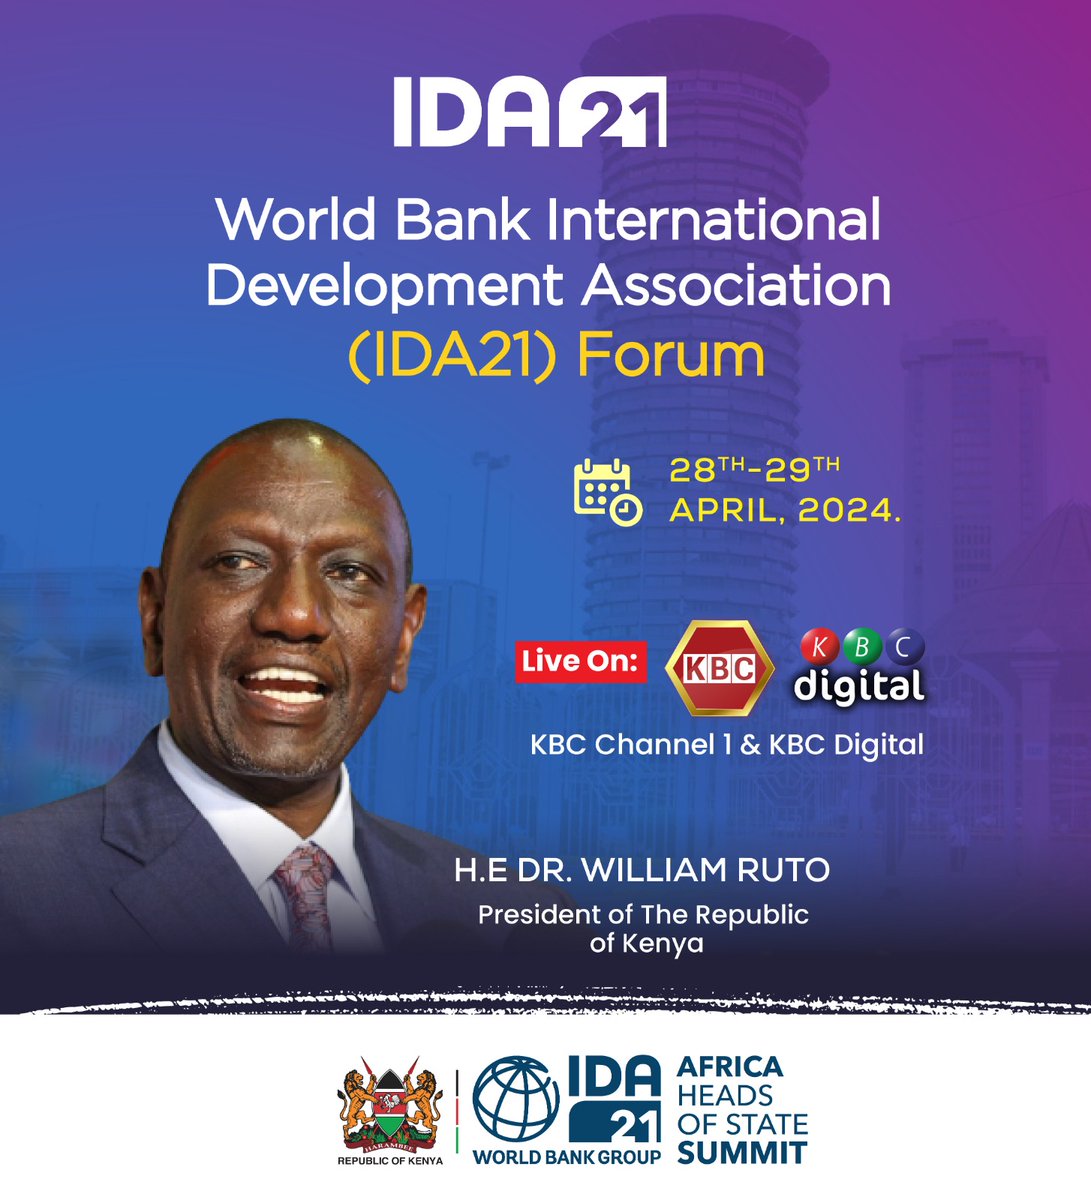 On 28th - 29th April, the Government of Kenya will be hosting African Heads of State and the World Bank to identify key priorities for financing in Africa and champion an ambitious financing replenishment of IDA resources. #IDAWorks #IDA21 #Kenya